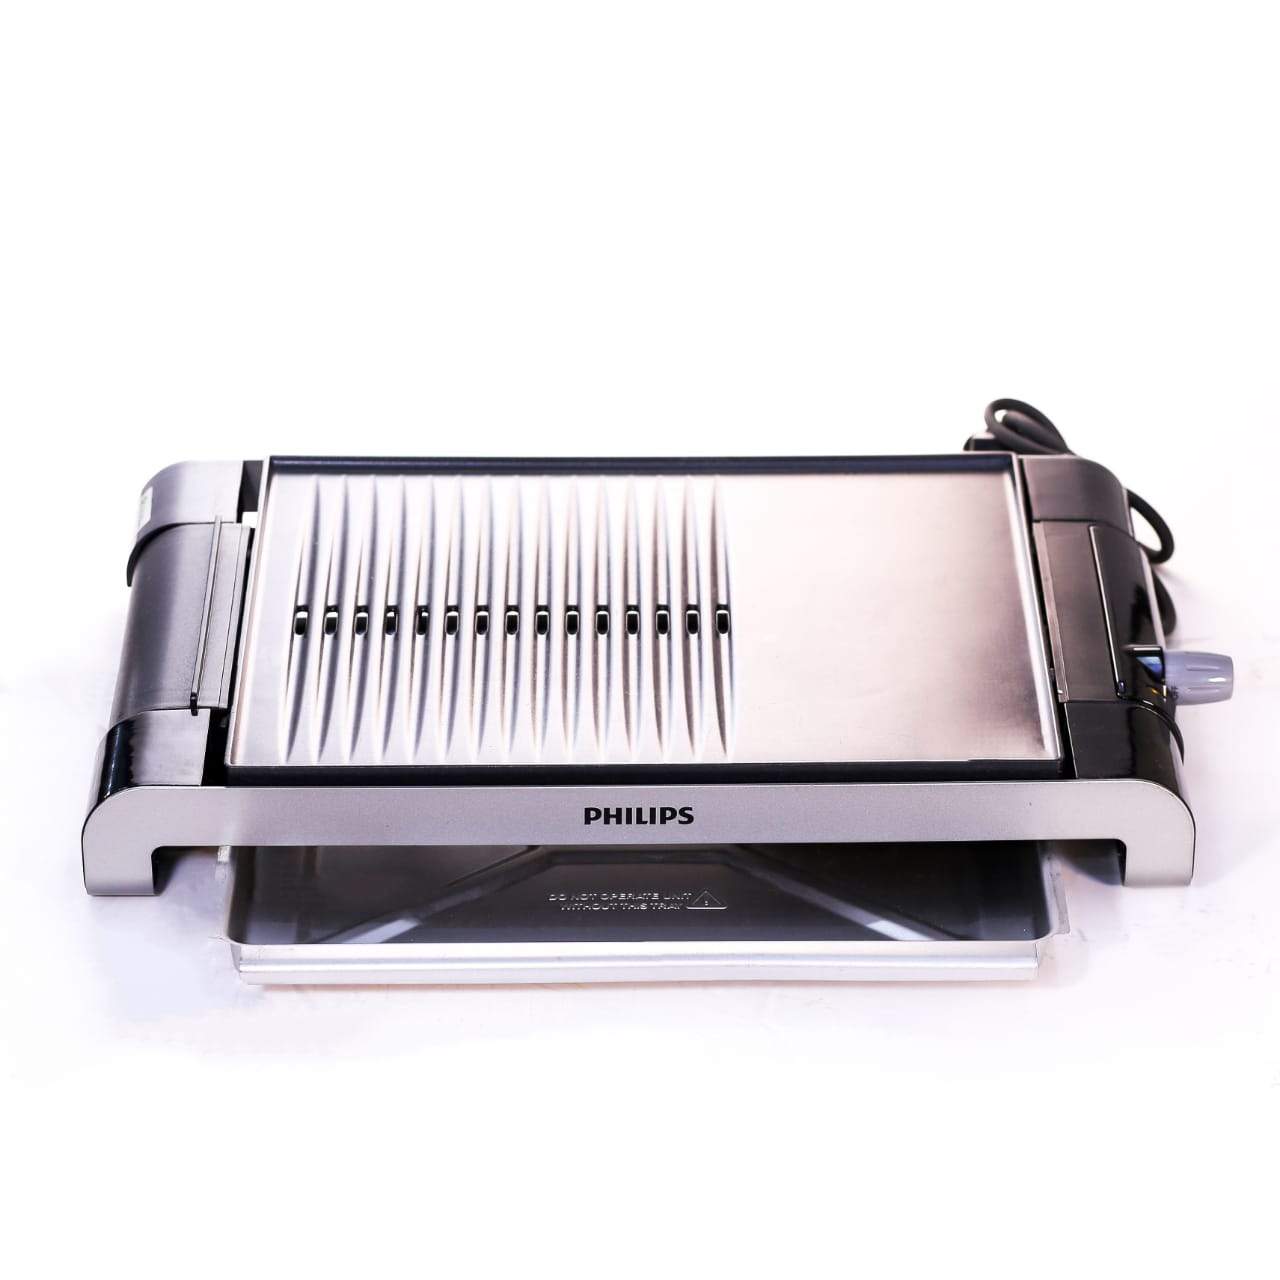 PHILIPS TABLE GRILL HD4419 PC